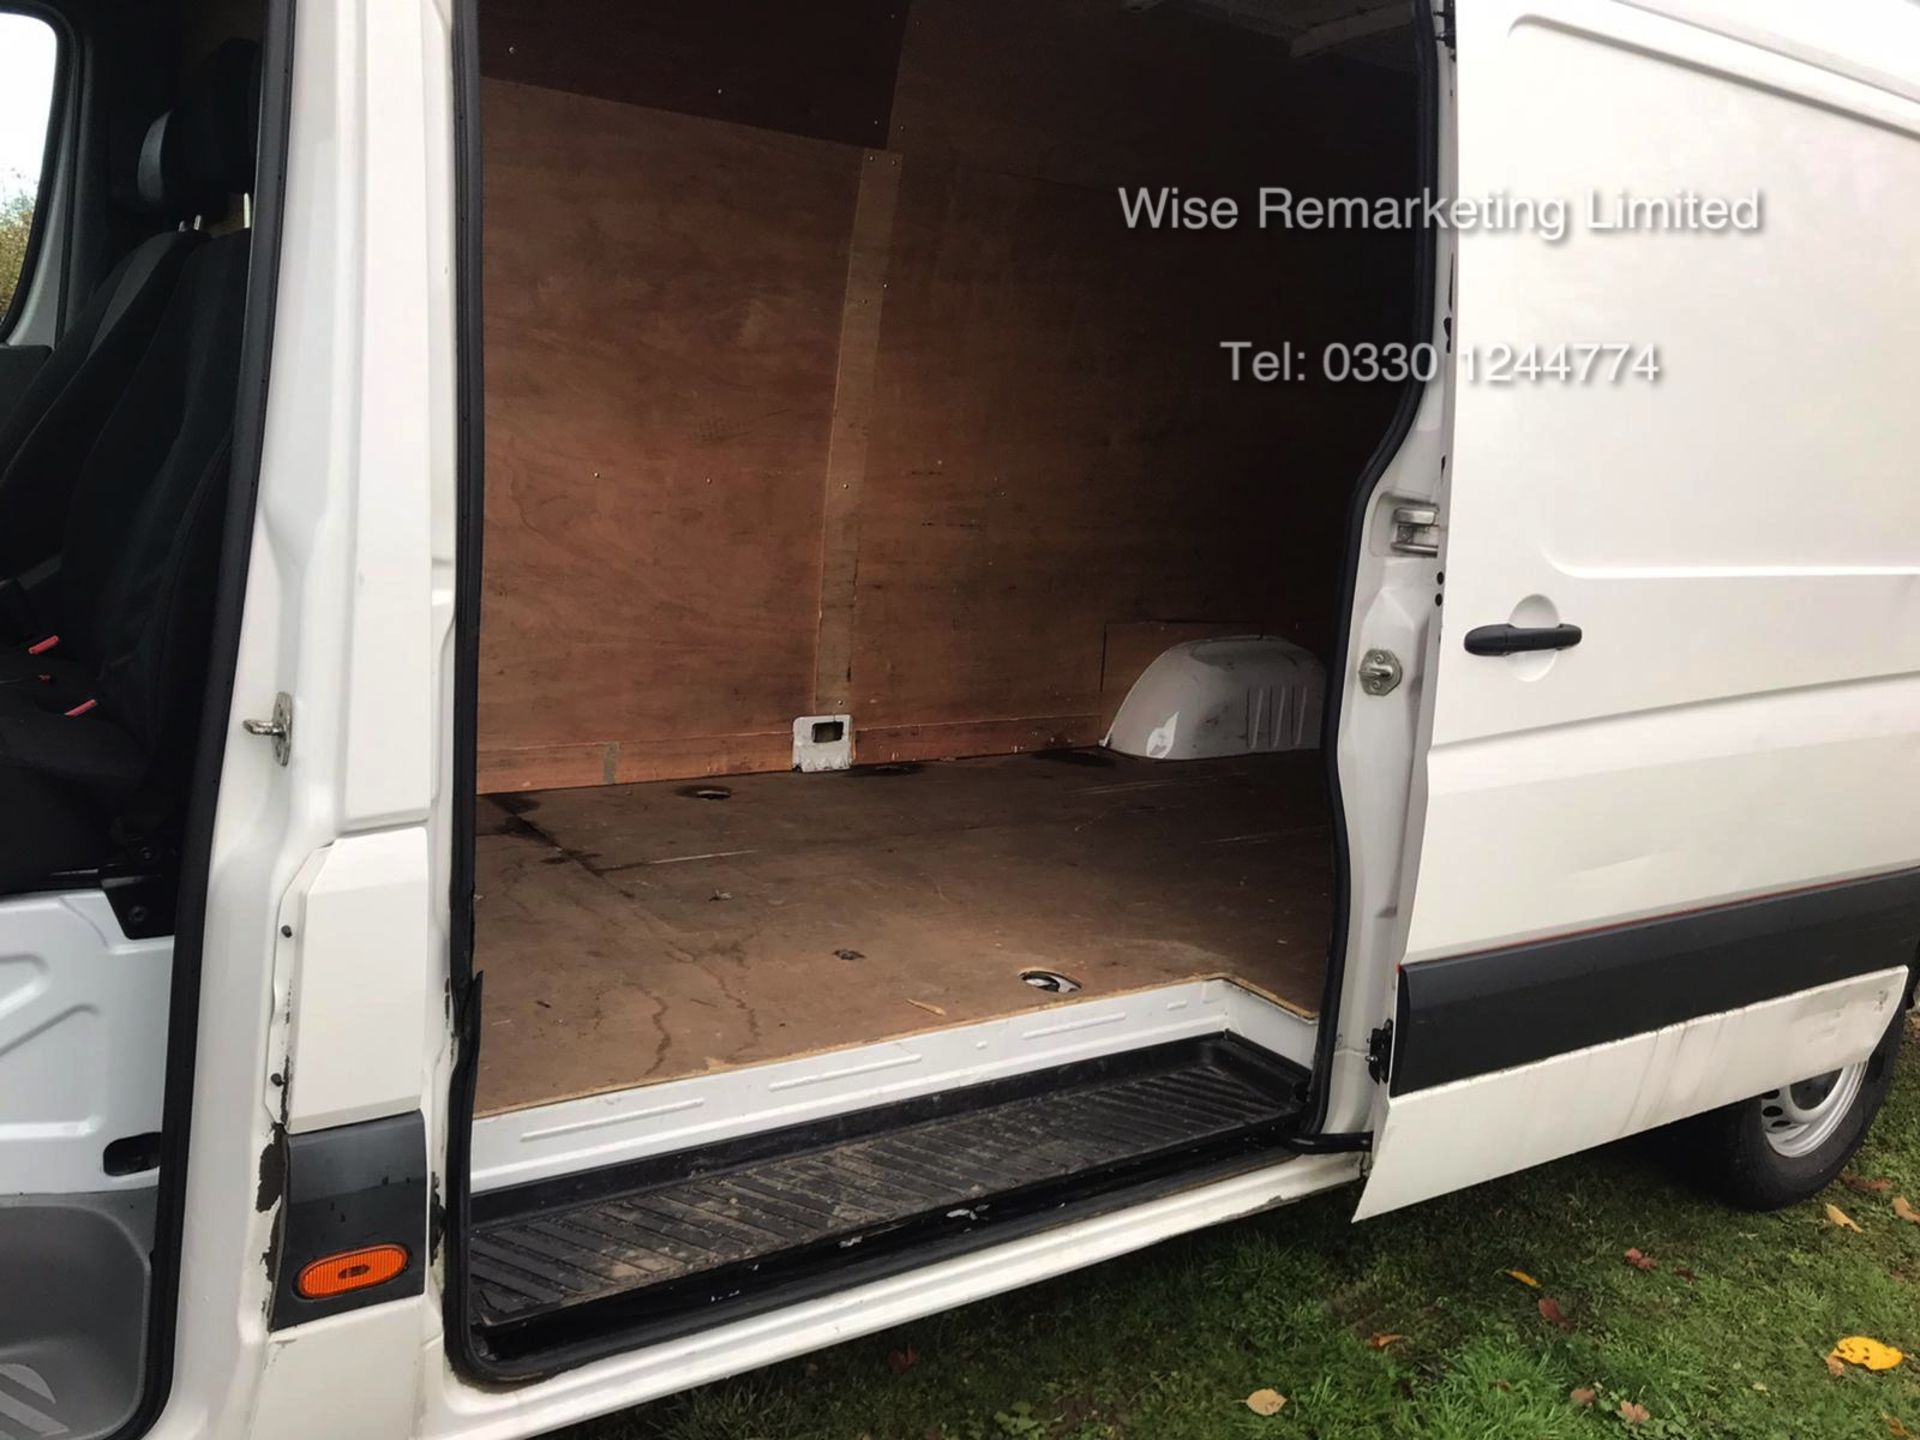 Volkswagen Crafter CR35 Startline 2.0l TDi - LWB - 2016 Model -1 Keeper From New - Service History - Image 6 of 15